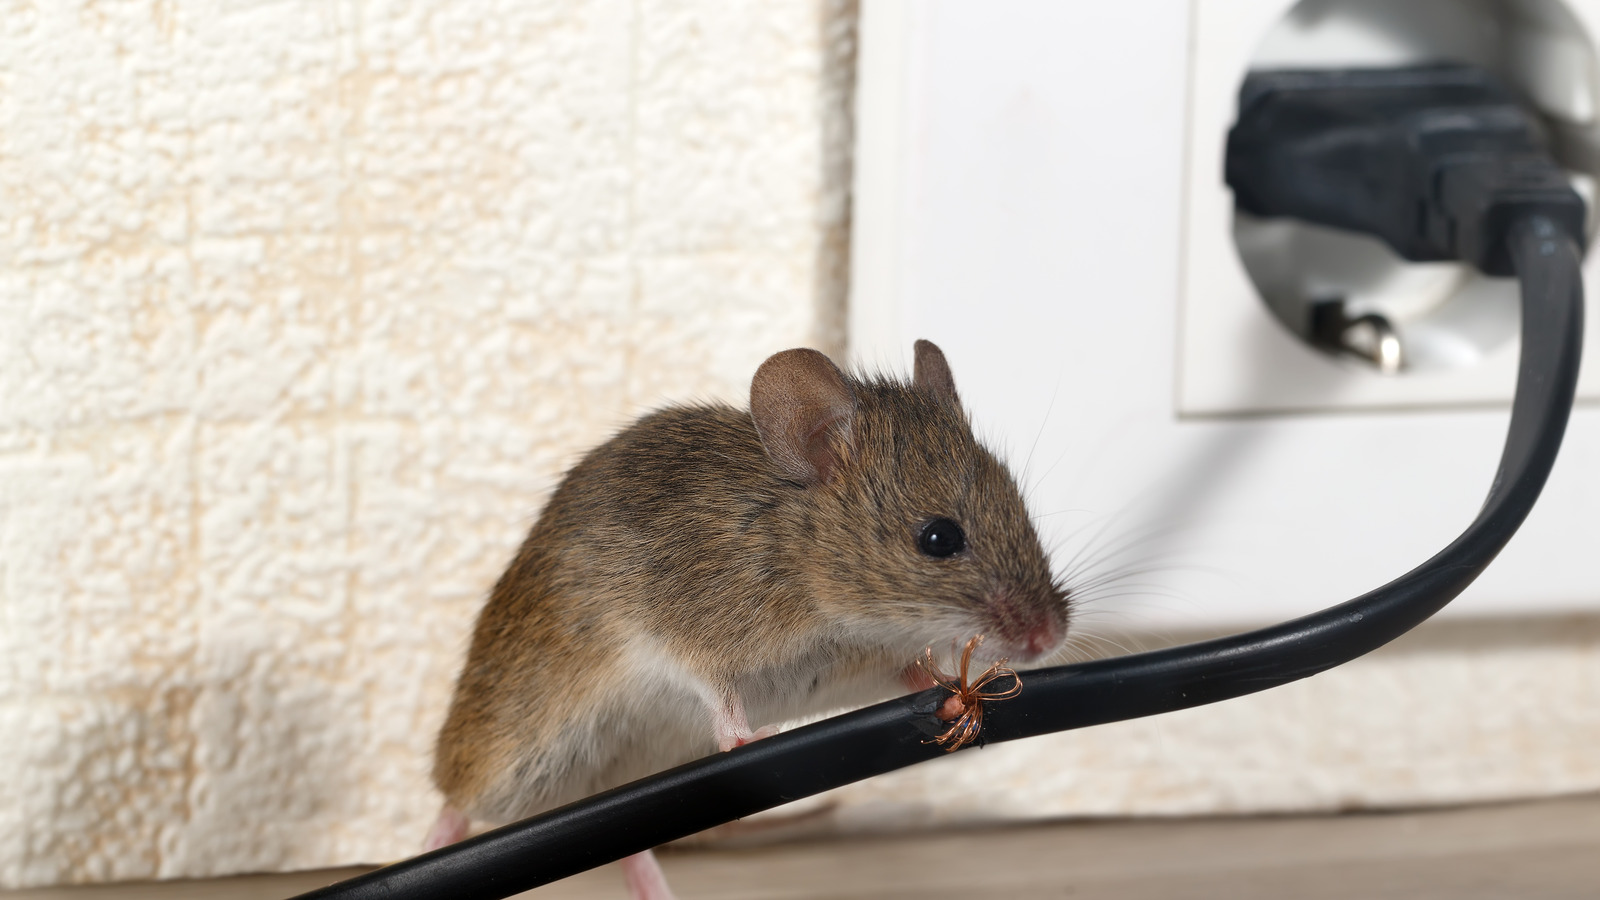 https://www.housedigest.com/img/gallery/can-you-use-dryer-sheets-to-keep-mice-away/l-intro-1656594716.jpg